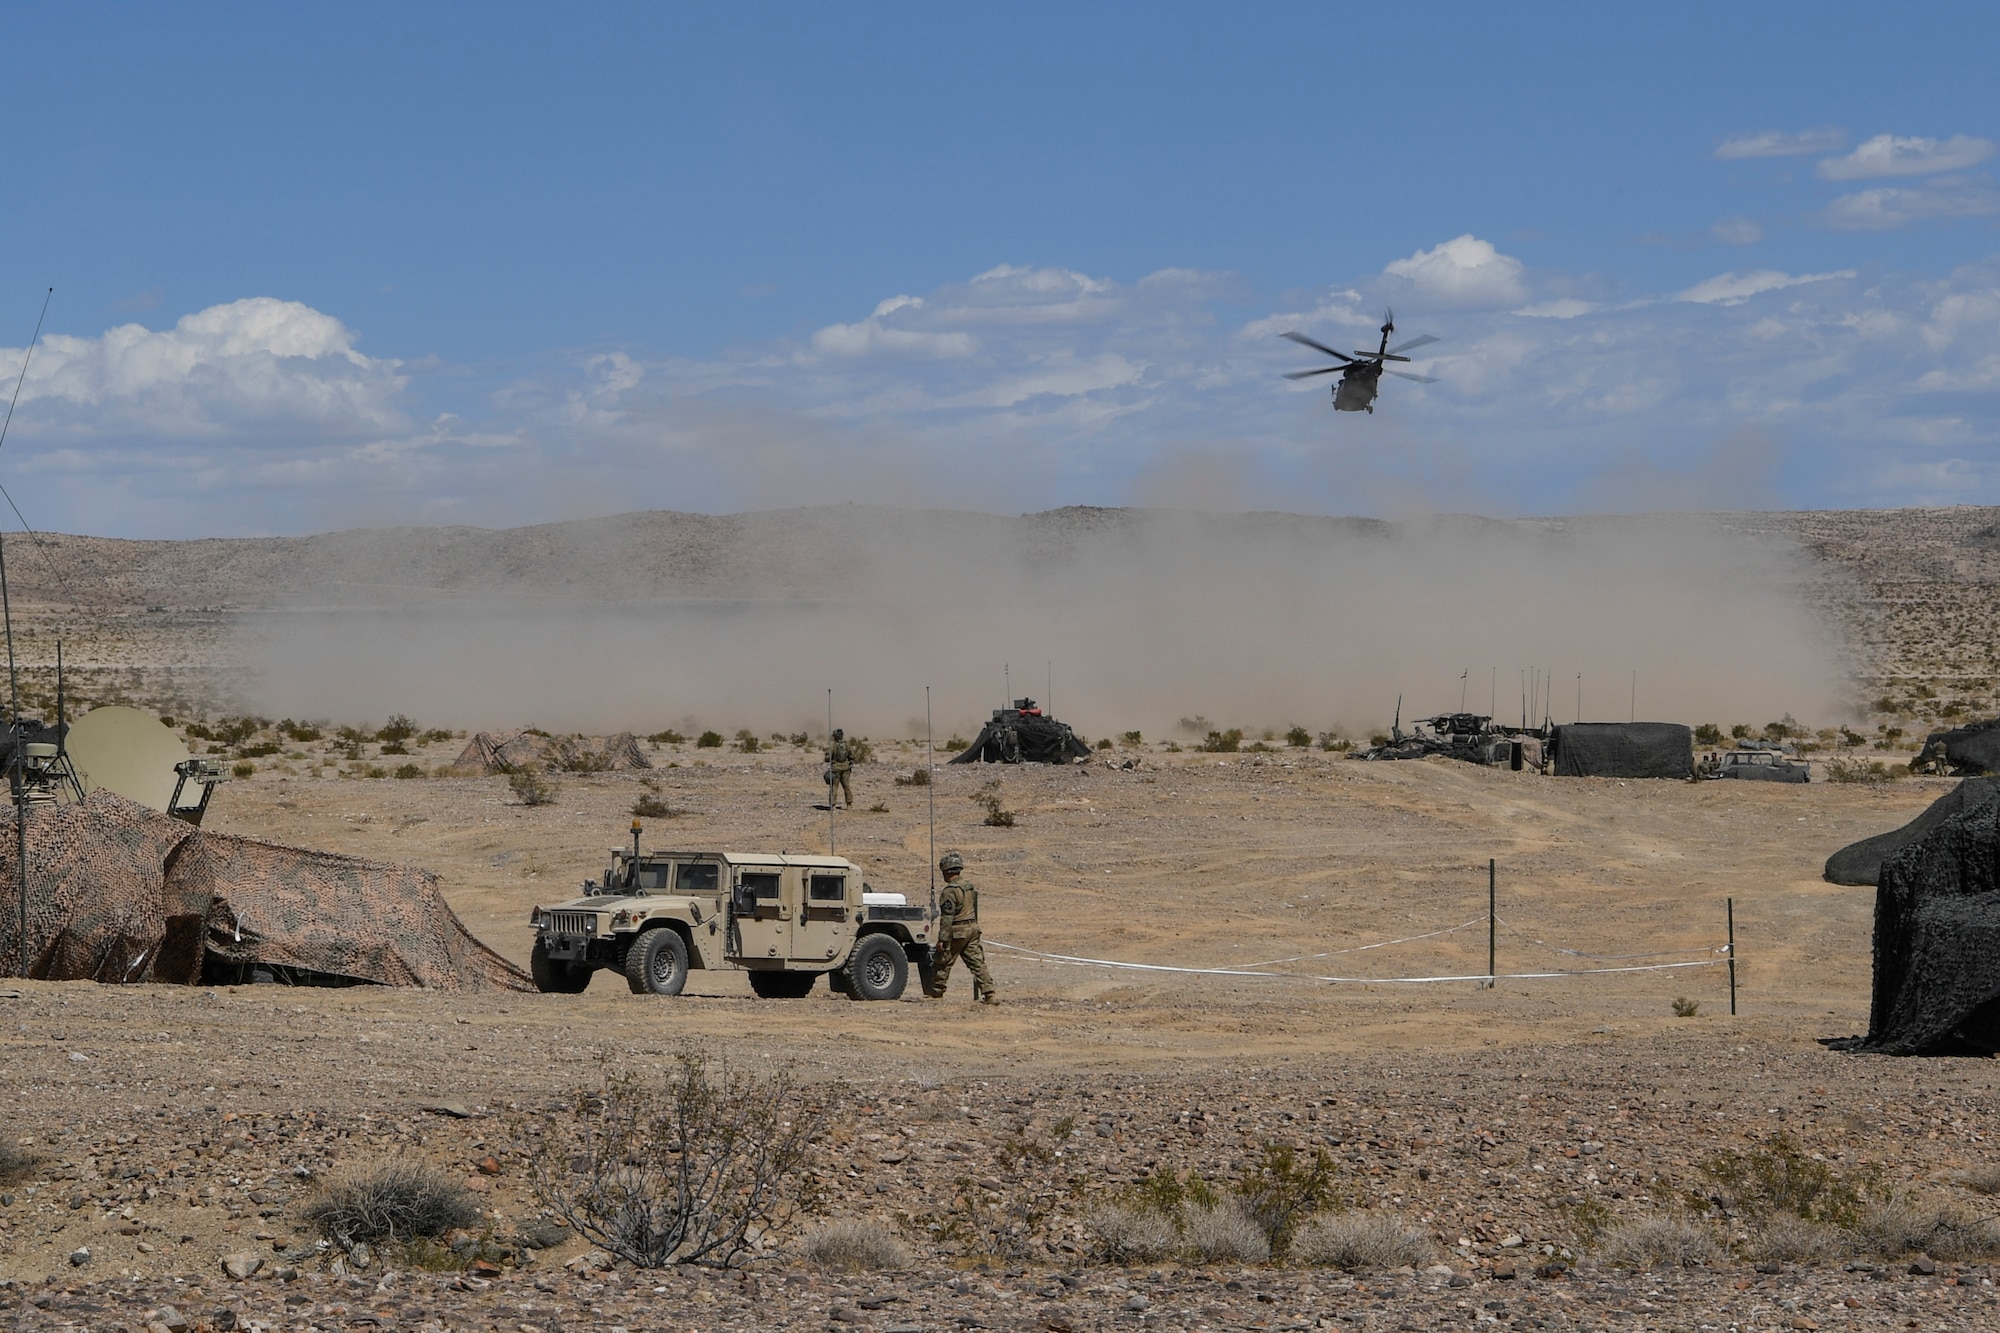 An Army AH-64 Apache helicopter lands as it brings leaders of the 520th Infantry Battalion based out of Joint Base Lewis-McChord, Washington, to a planning meeting for a simulated operation during a scenario as part of NTC 18-10 at Fort Irwin, California, Sept. 5, 2018.